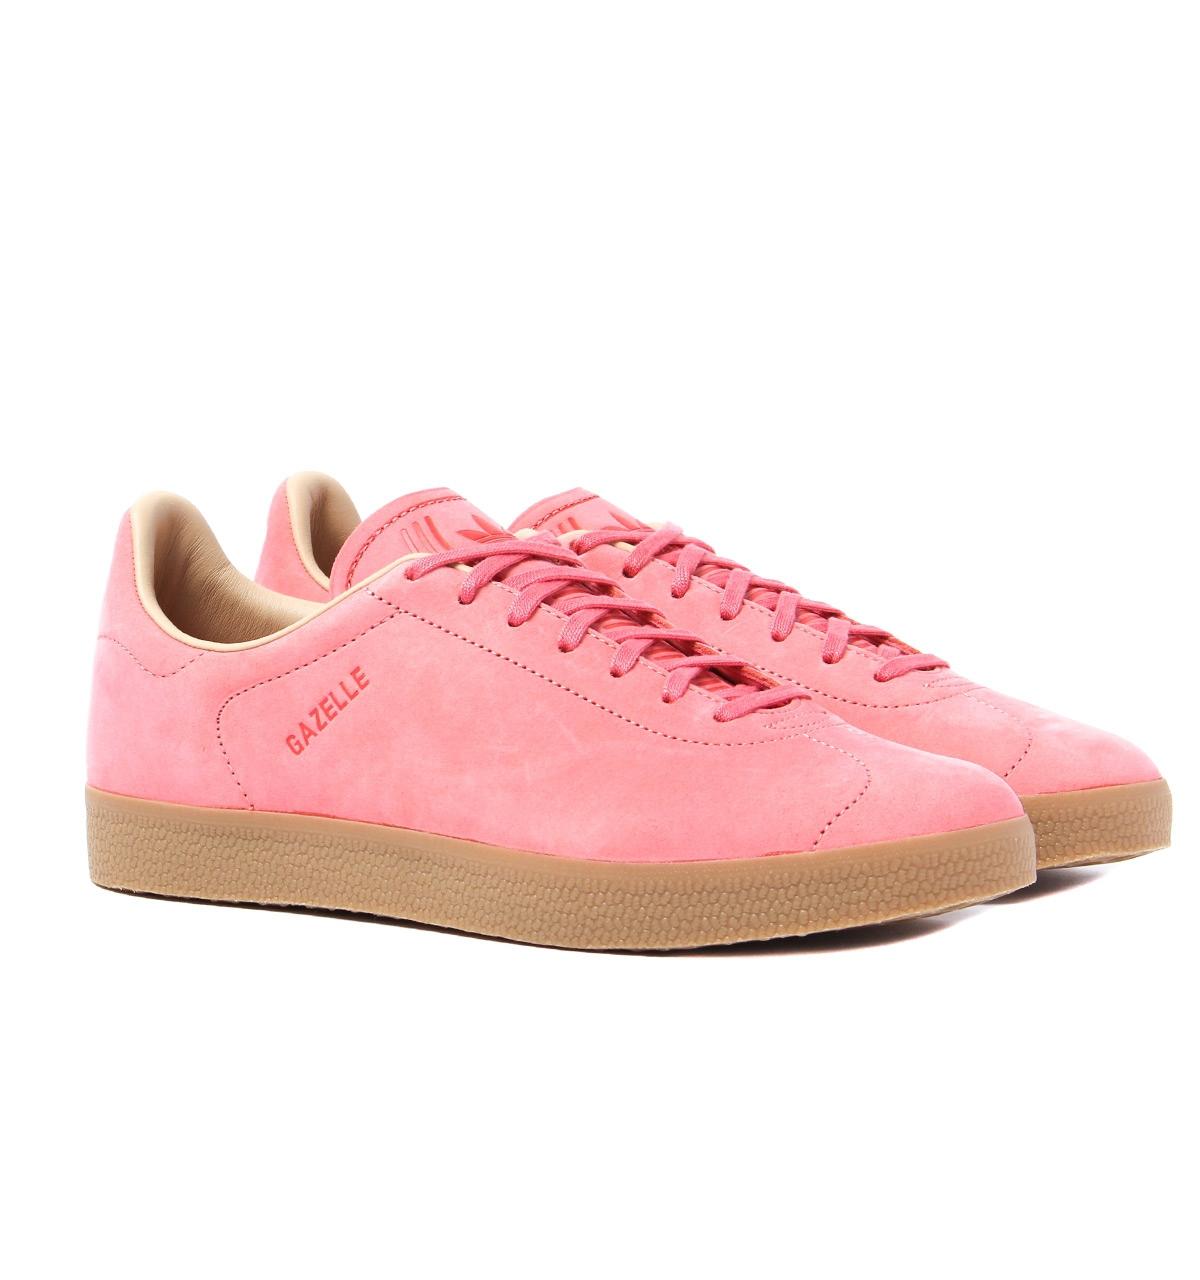 adidas Originals Leather Gazelle Decon Tactile Rose Pink Trainers - Lyst